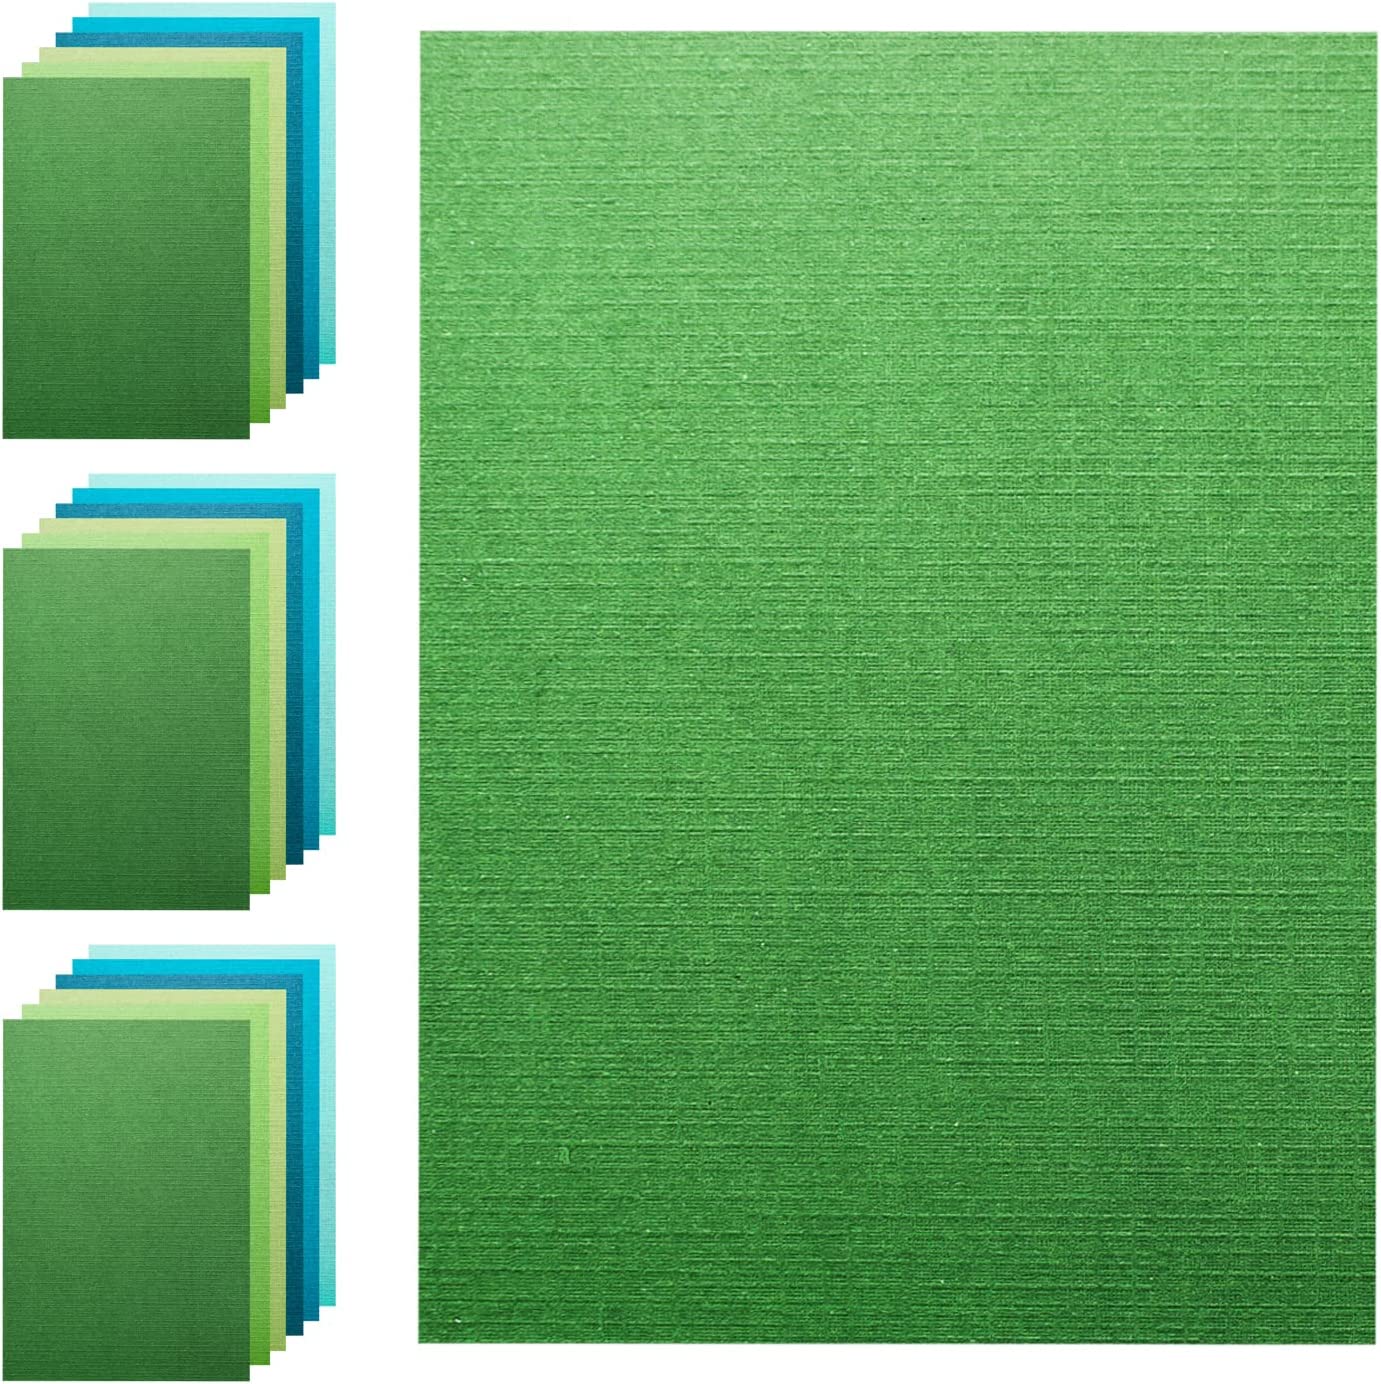  8.5x11 Cardstock 25sheets Colored Cardstock Assorted 25  Colors, 90 lb/250 gsm Card Stock Colored Paper for Cricut Machine, Card  Making, Scrapbook & DIY Crafts : Arts, Crafts & Sewing